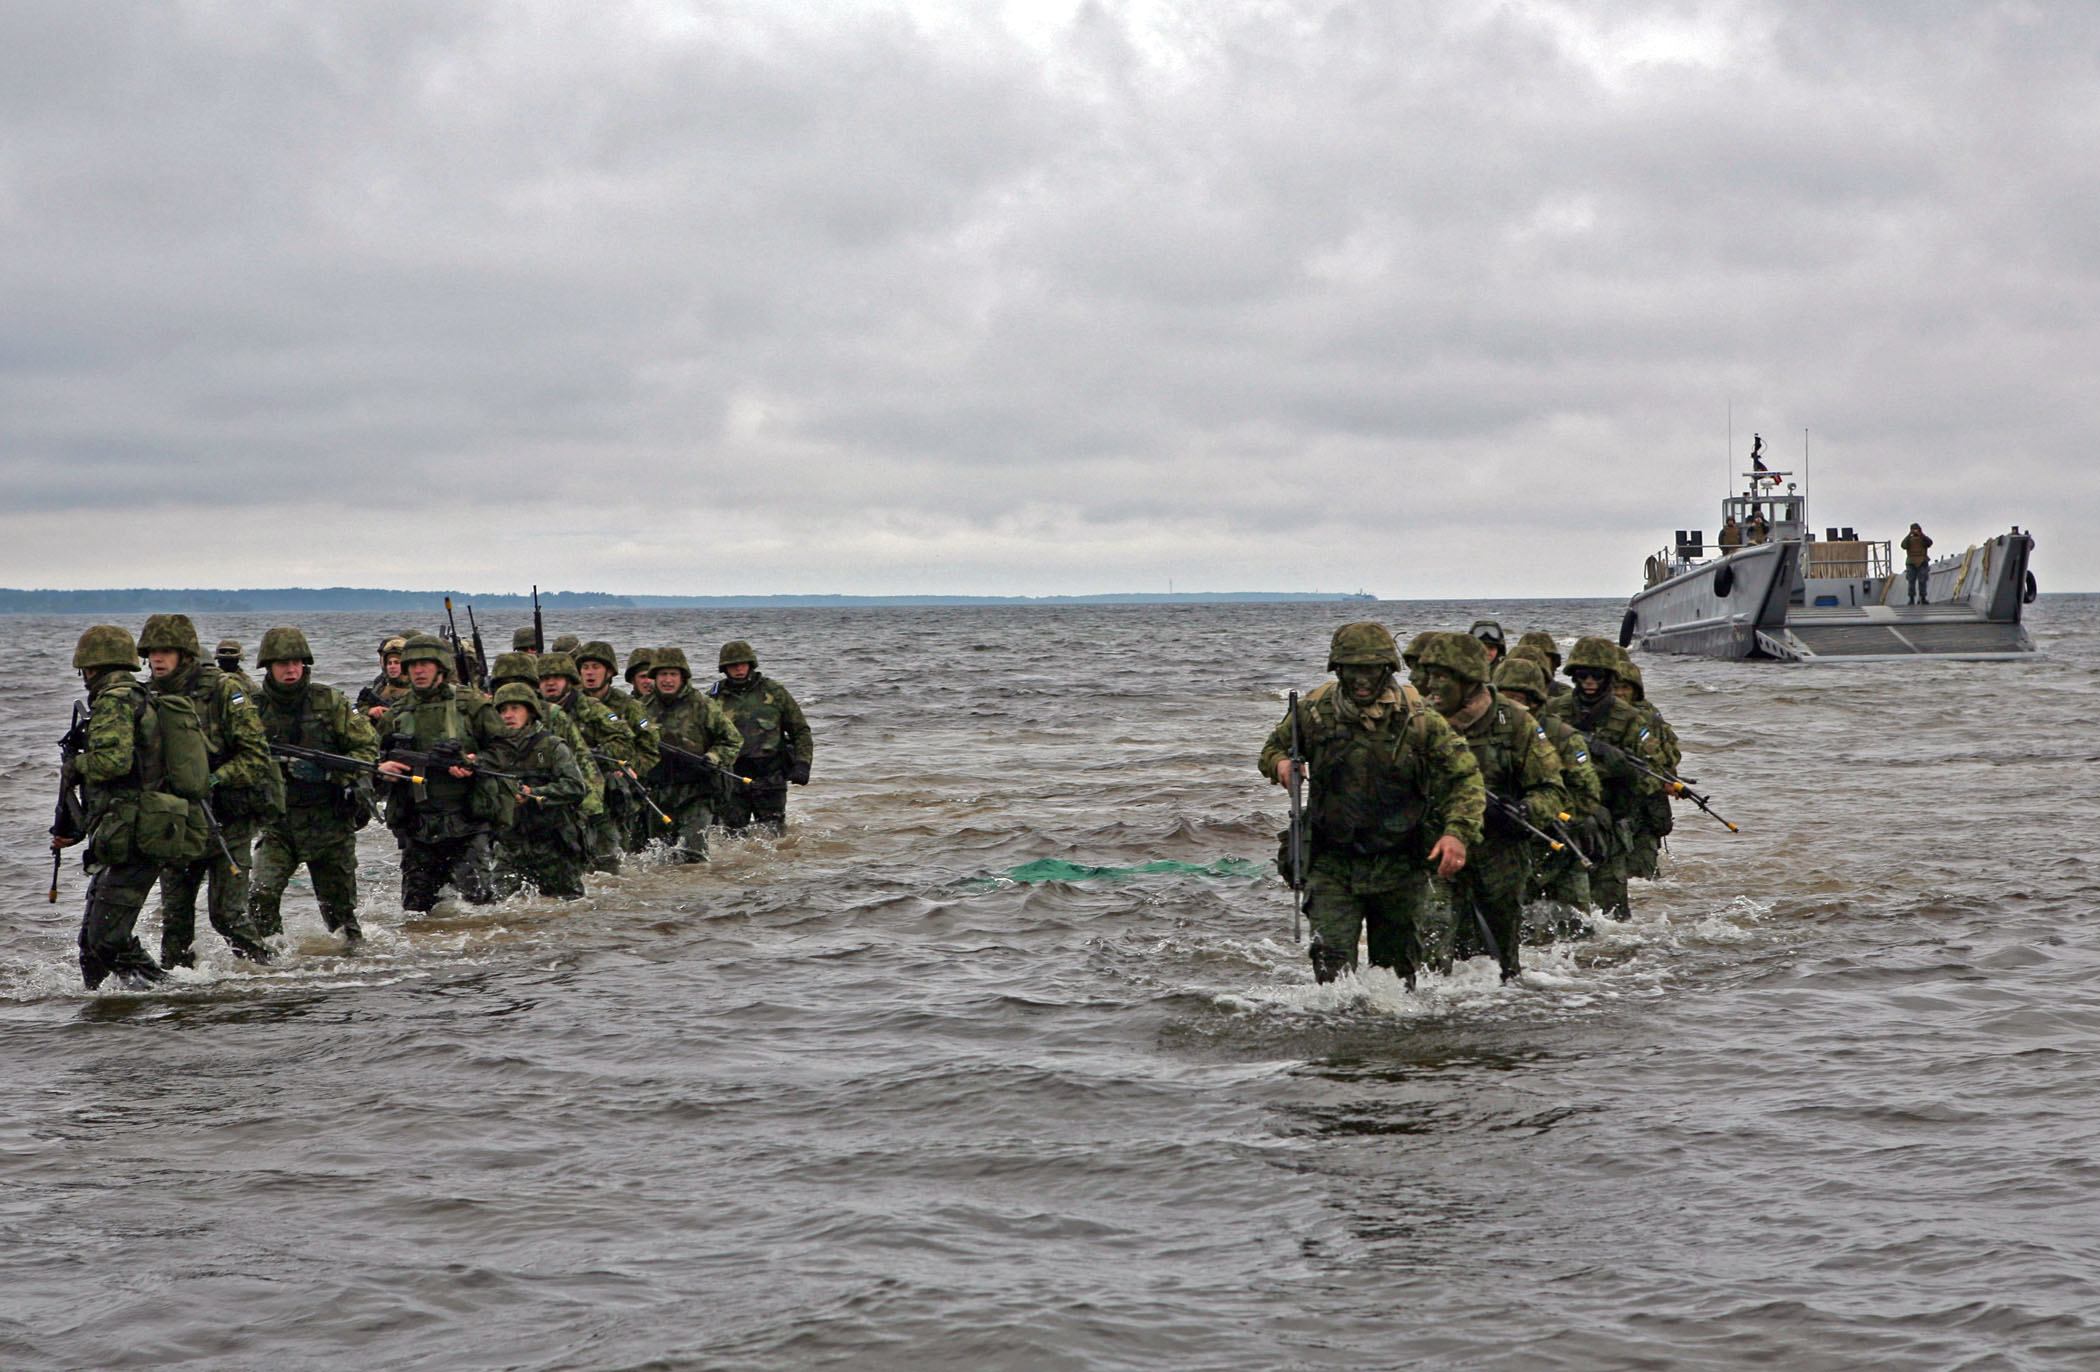 Estonian soldiers wade ashore during a combined U.S. and Estonia amphibious assault training exercise during Baltic Operations (BALTOPS) 2010. US Navy Photo 